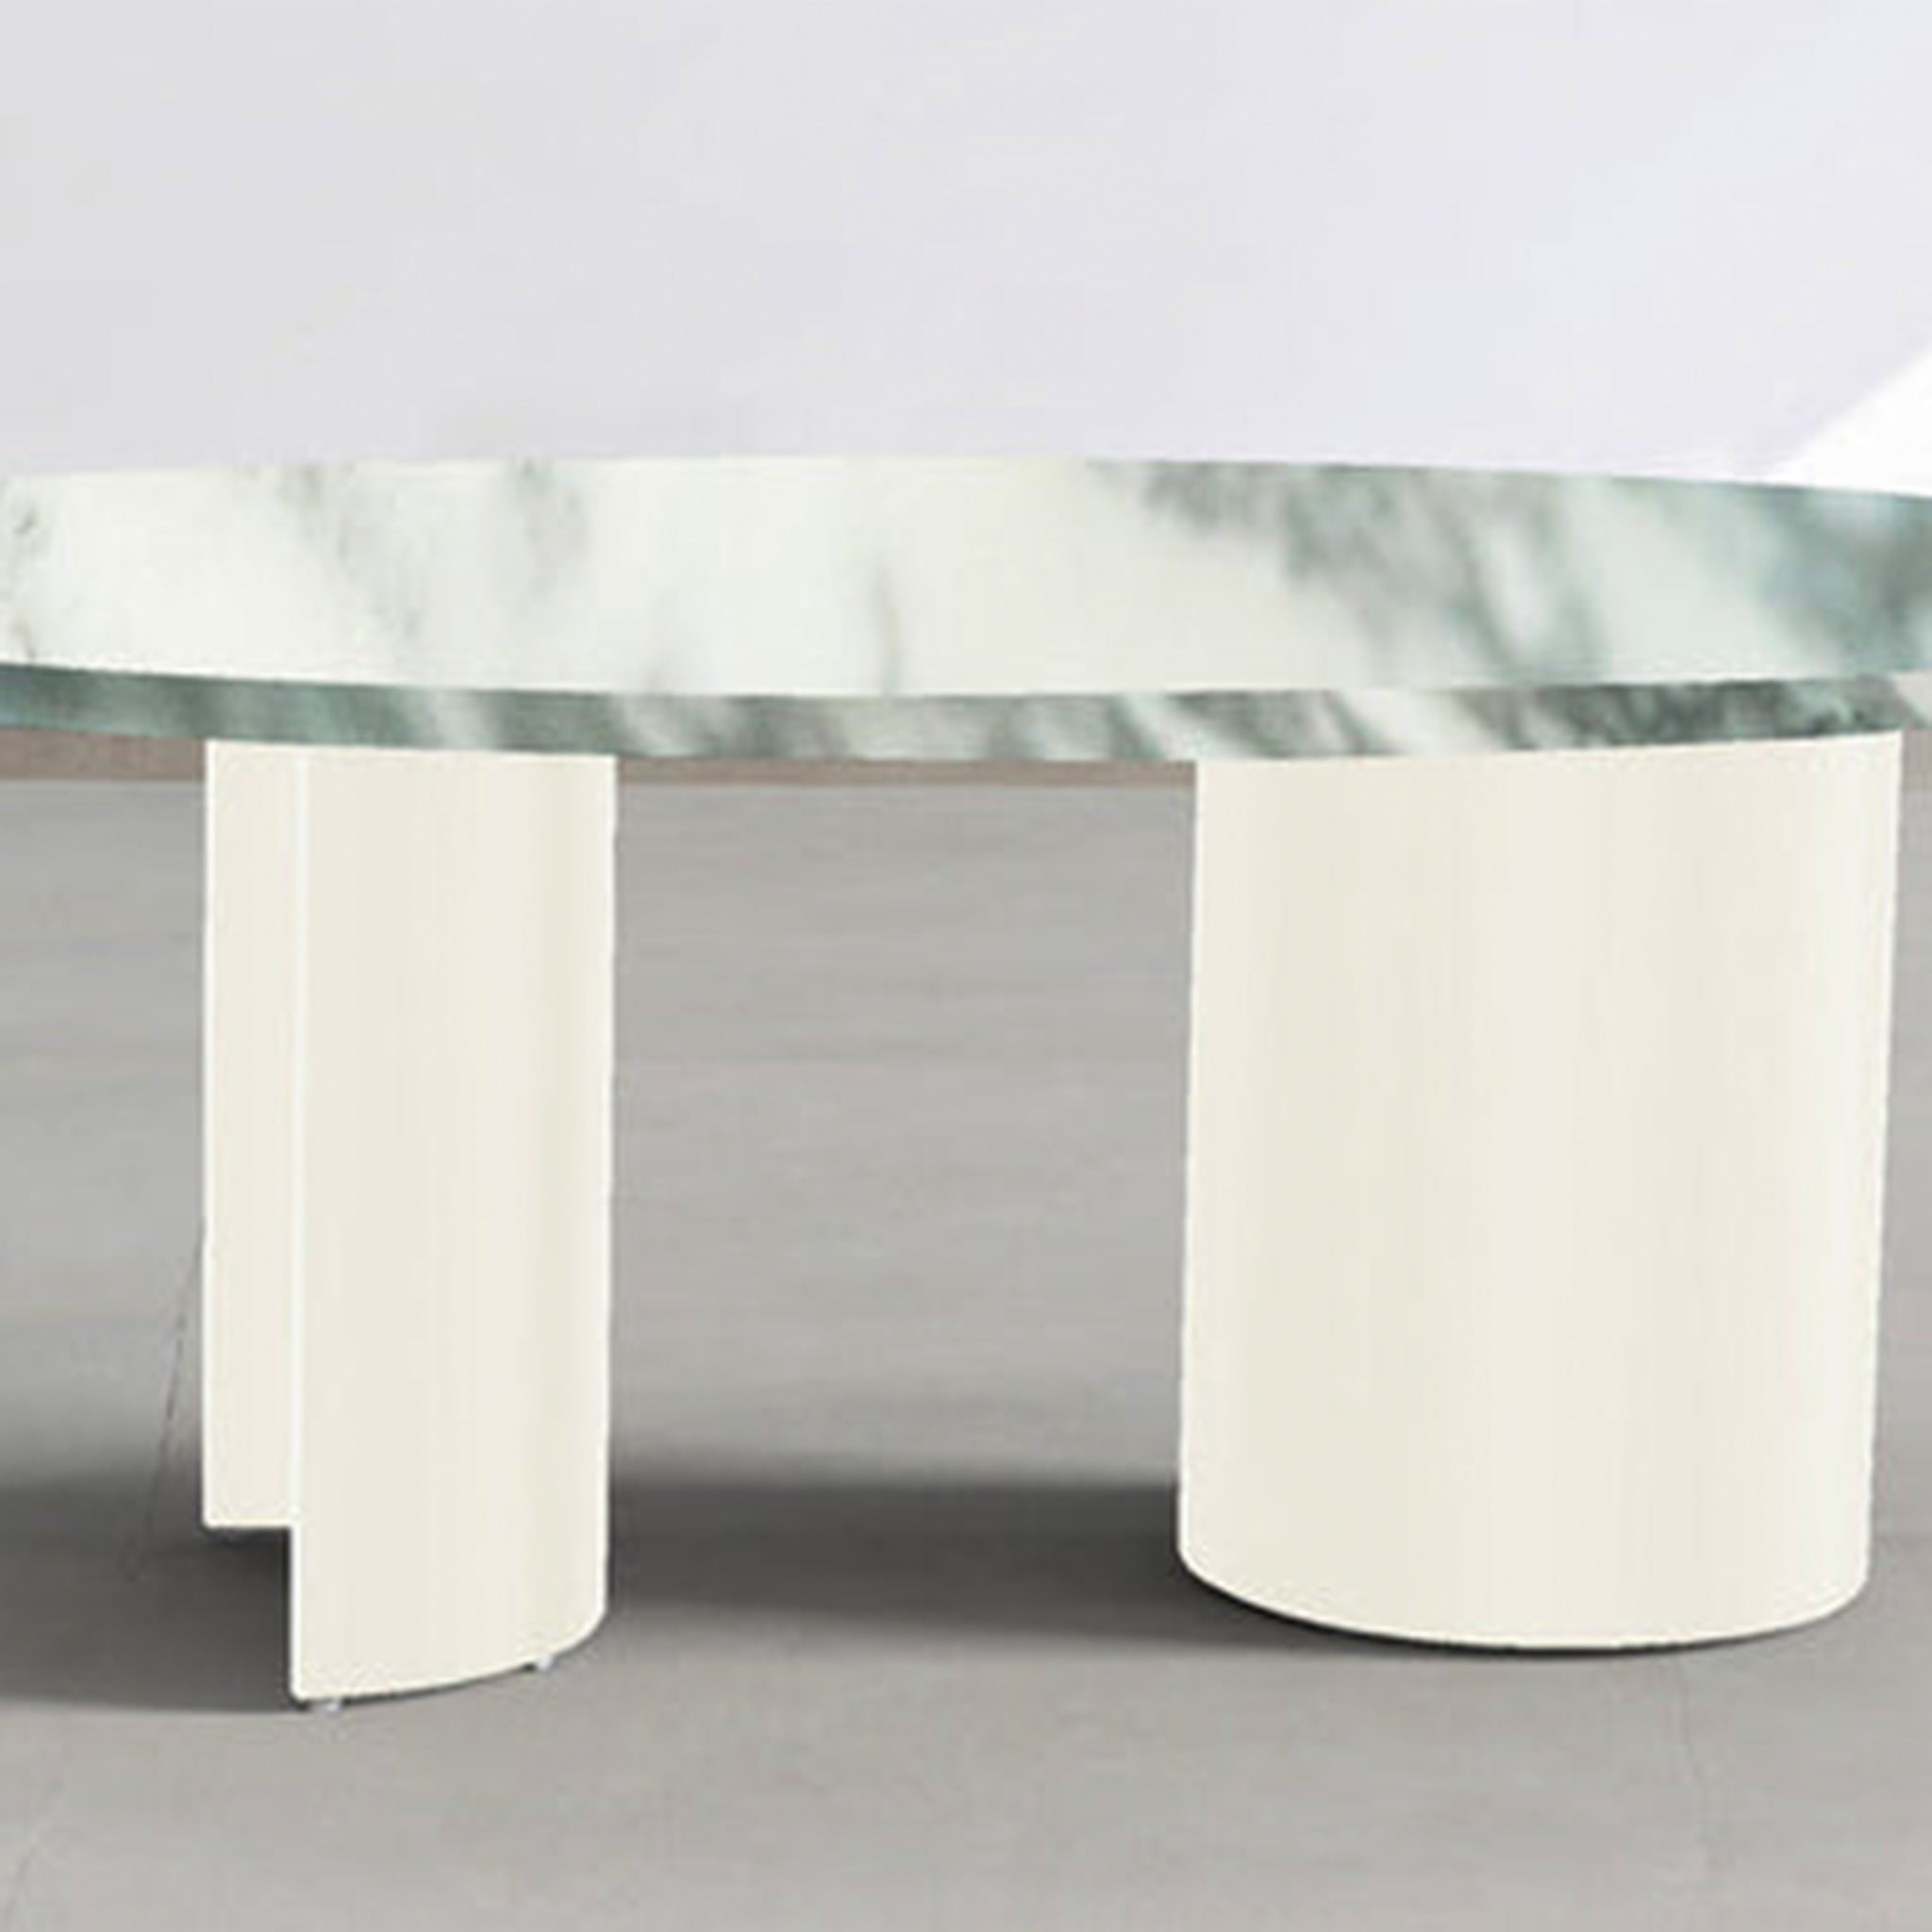 Honed Marble Coffee Table: Silky smooth finish for a luxurious feel.